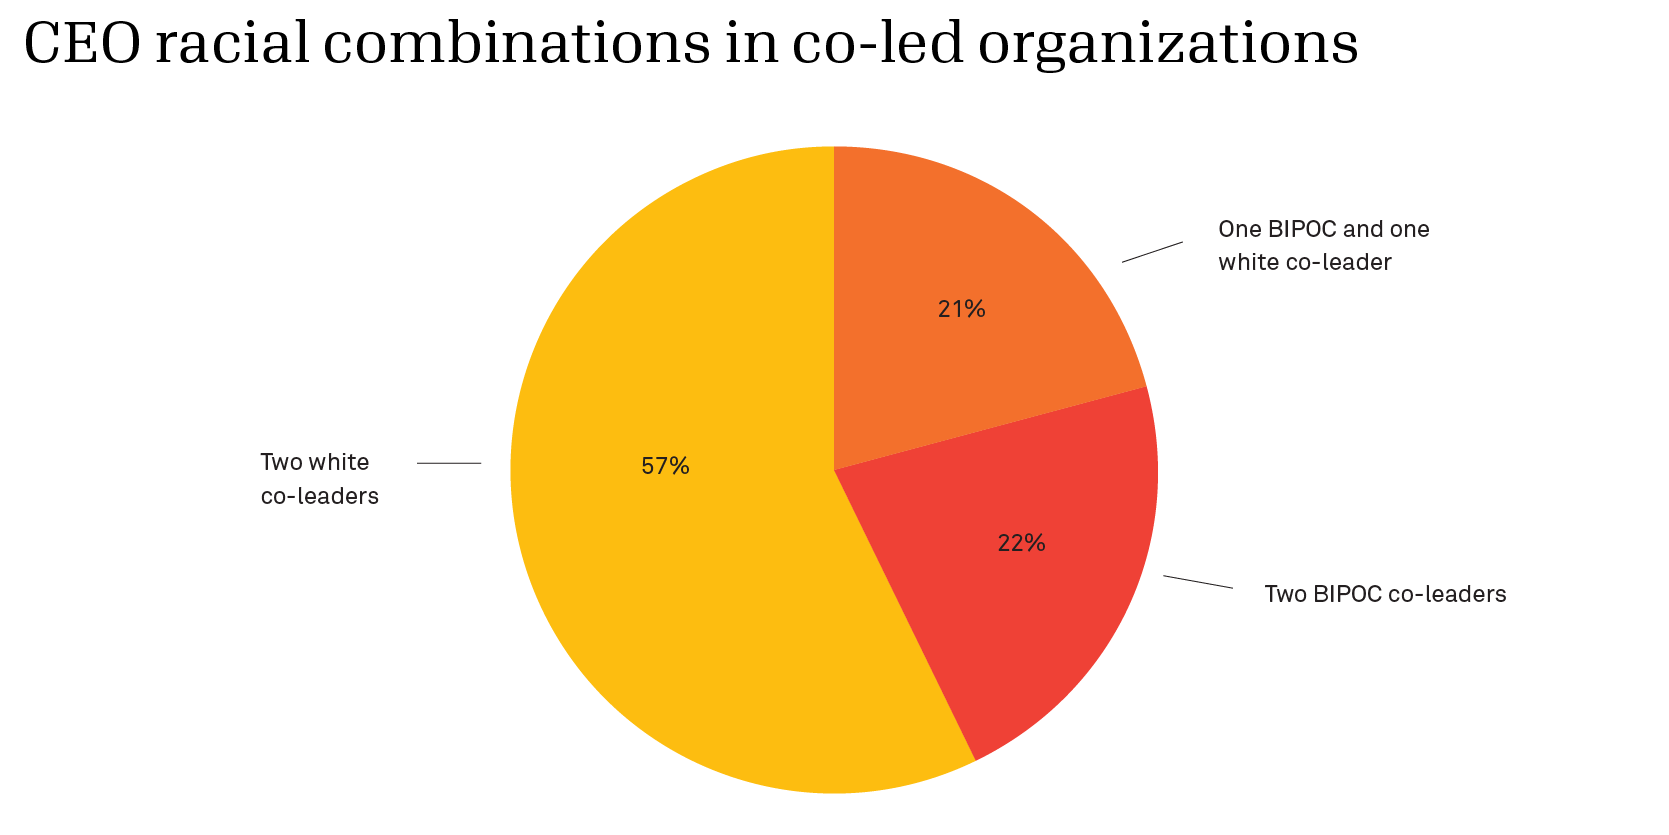 Pie chart of CEO racial combinations in co-led organizations. 57% have two white co-leaders, 22% have two BIPOC co-leaders, and 21% have one BIPOC and one white co-leader. 